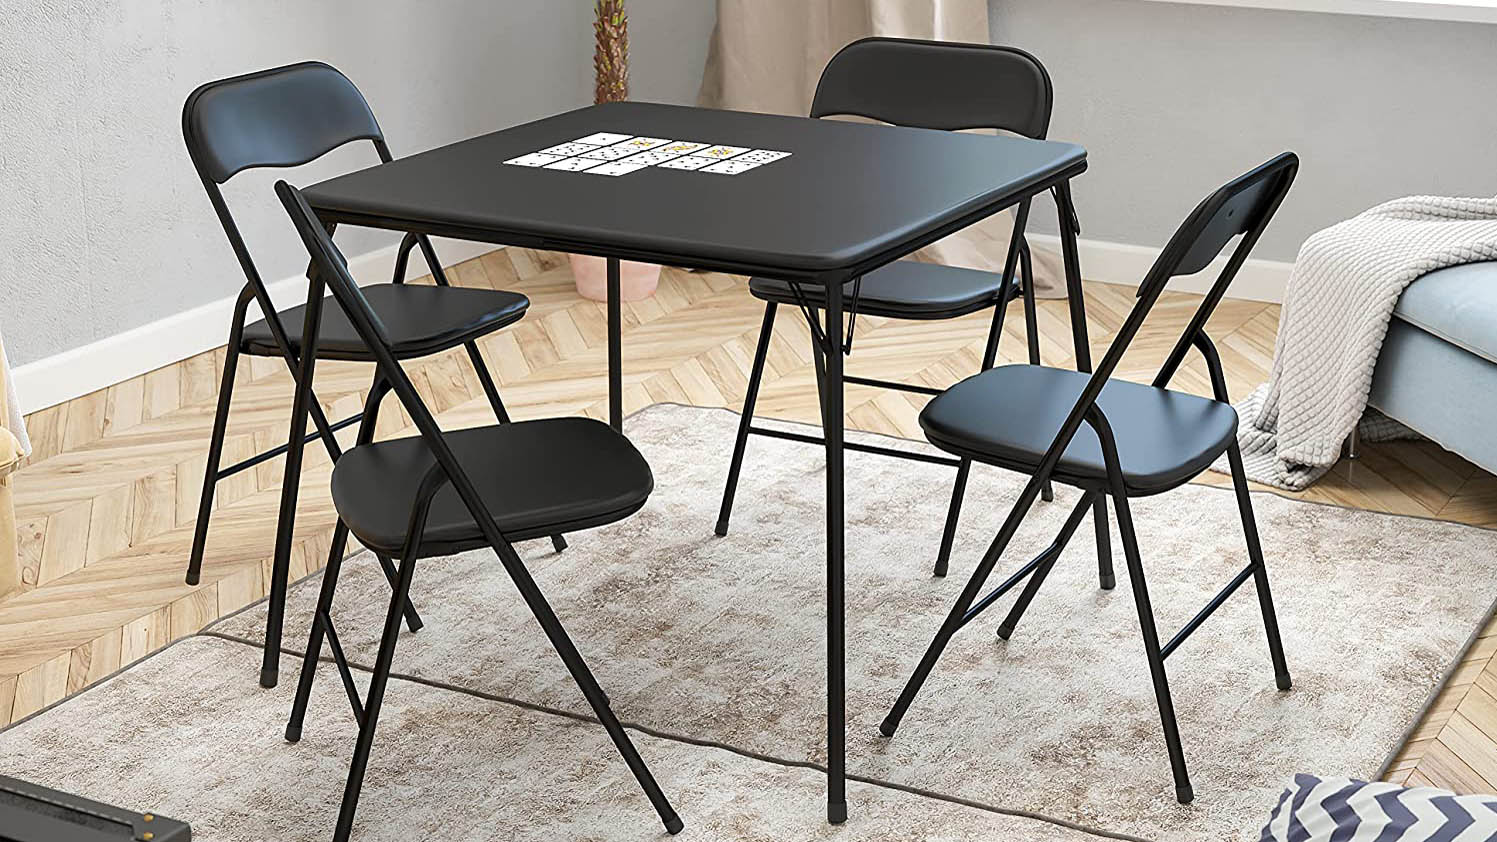 Folding chairs and table